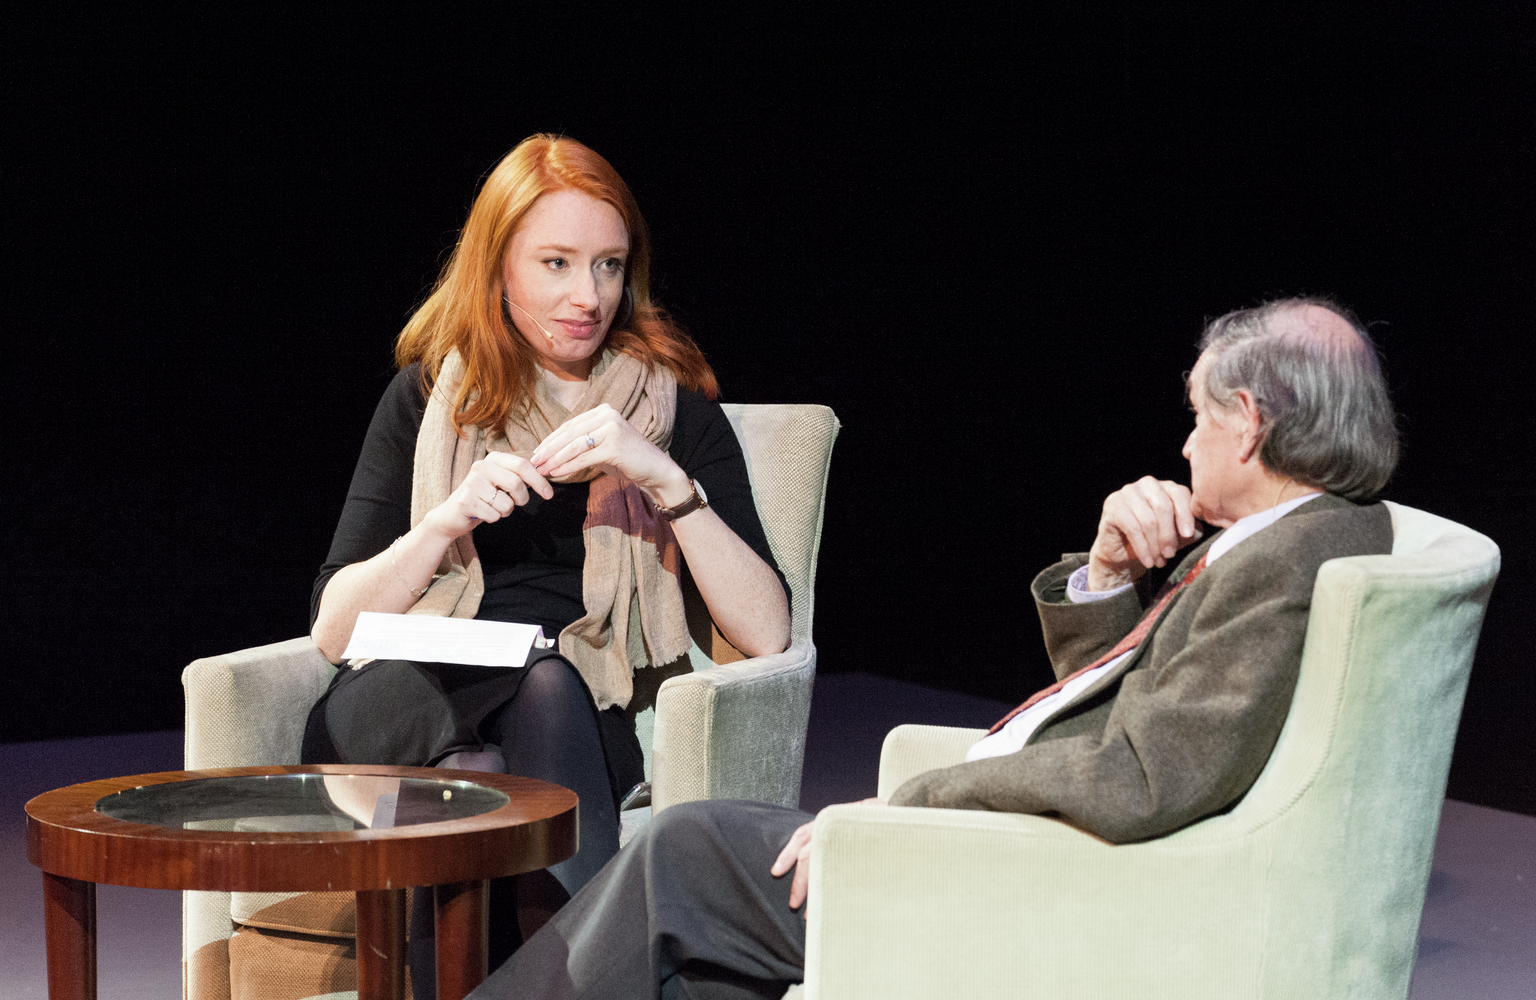 Sir Roger Penrose and Hannah Fry at Oxford Mathematics London Public Lecture: 'To a physicist I am a mathematician; to a mathematician, a physicist'